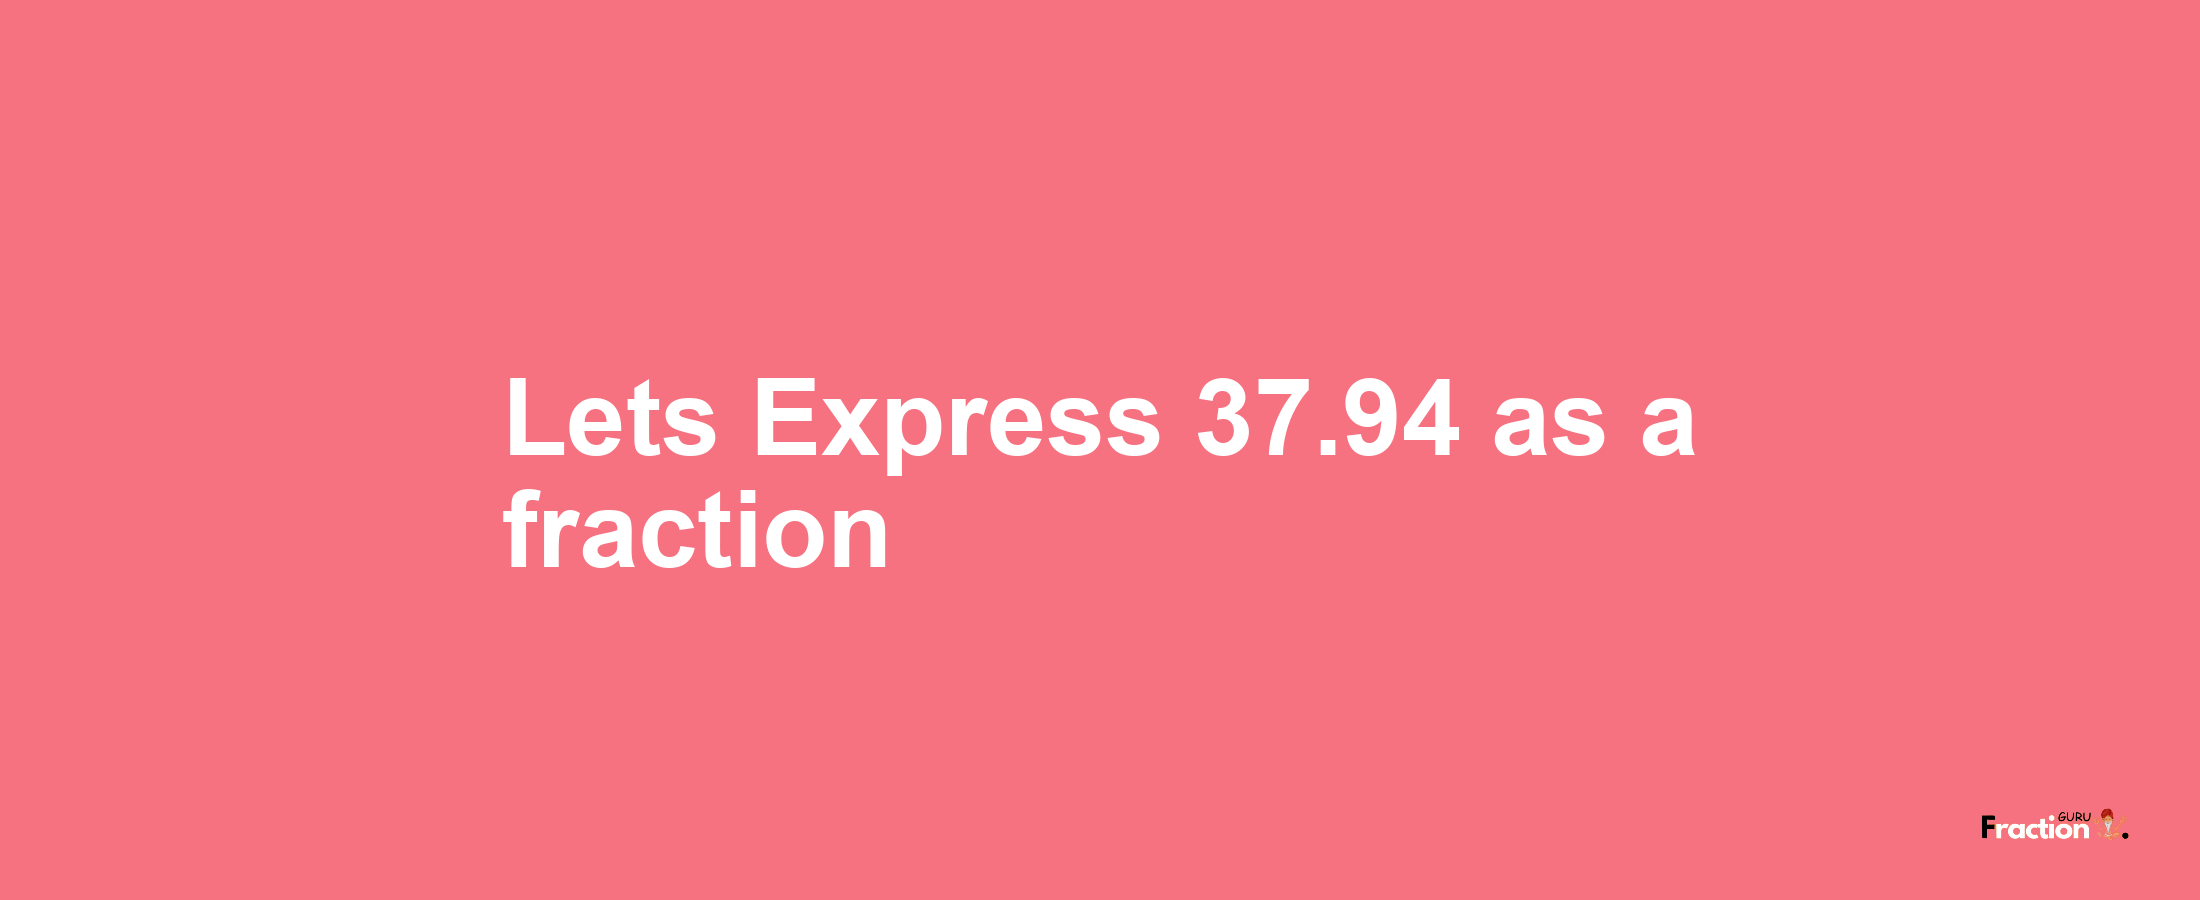 Lets Express 37.94 as afraction